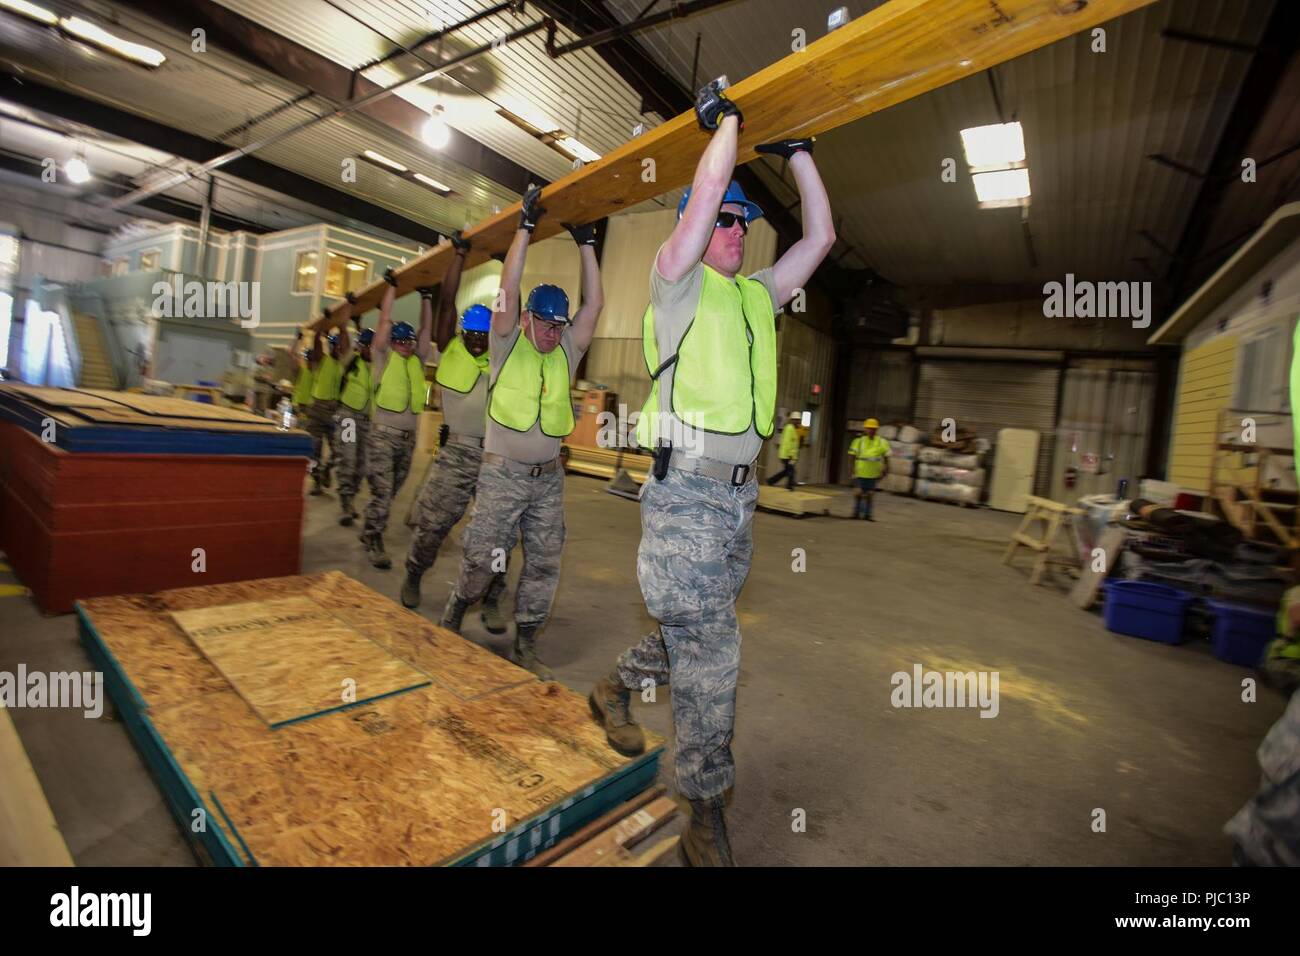 More than 40 U.S. Airmen from the South Carolina Air National Guard’s 169th Civil Engineer Squadron spent their annual training constructing homes for Native American veterans in Gallup, New Mexico, July 11, 2018. The “Deployment for Training” mission partnered military engineers with the Southwest Indian Foundation to construct homes from start to finish. Stock Photo